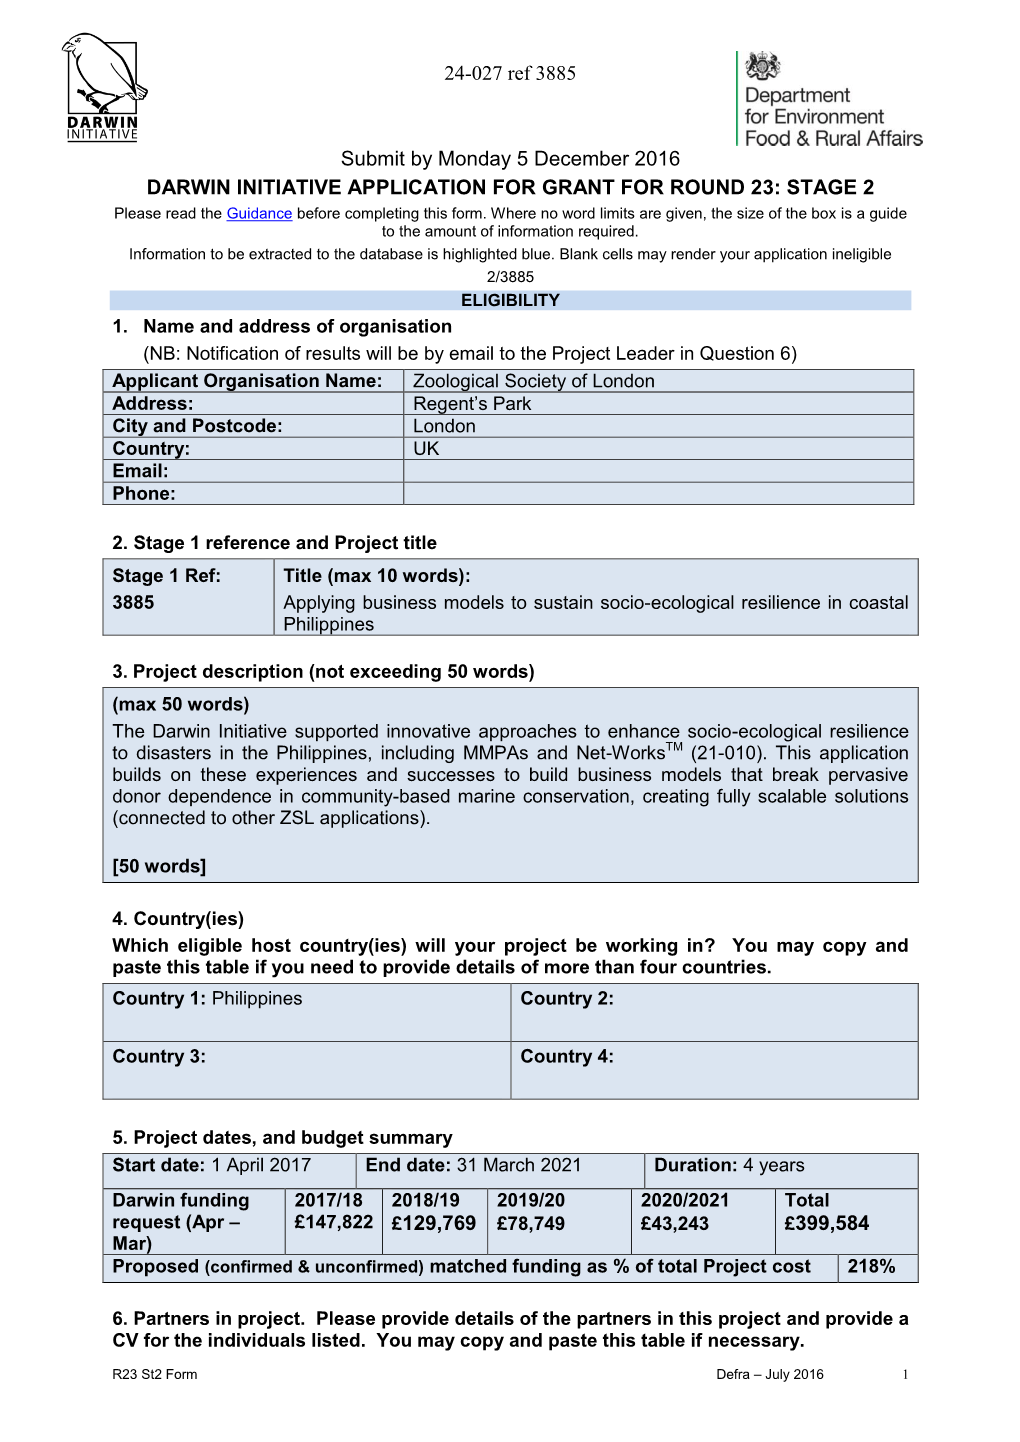 Application Form Will Form the Basis of the Project Schedule Should This Application Be Successful